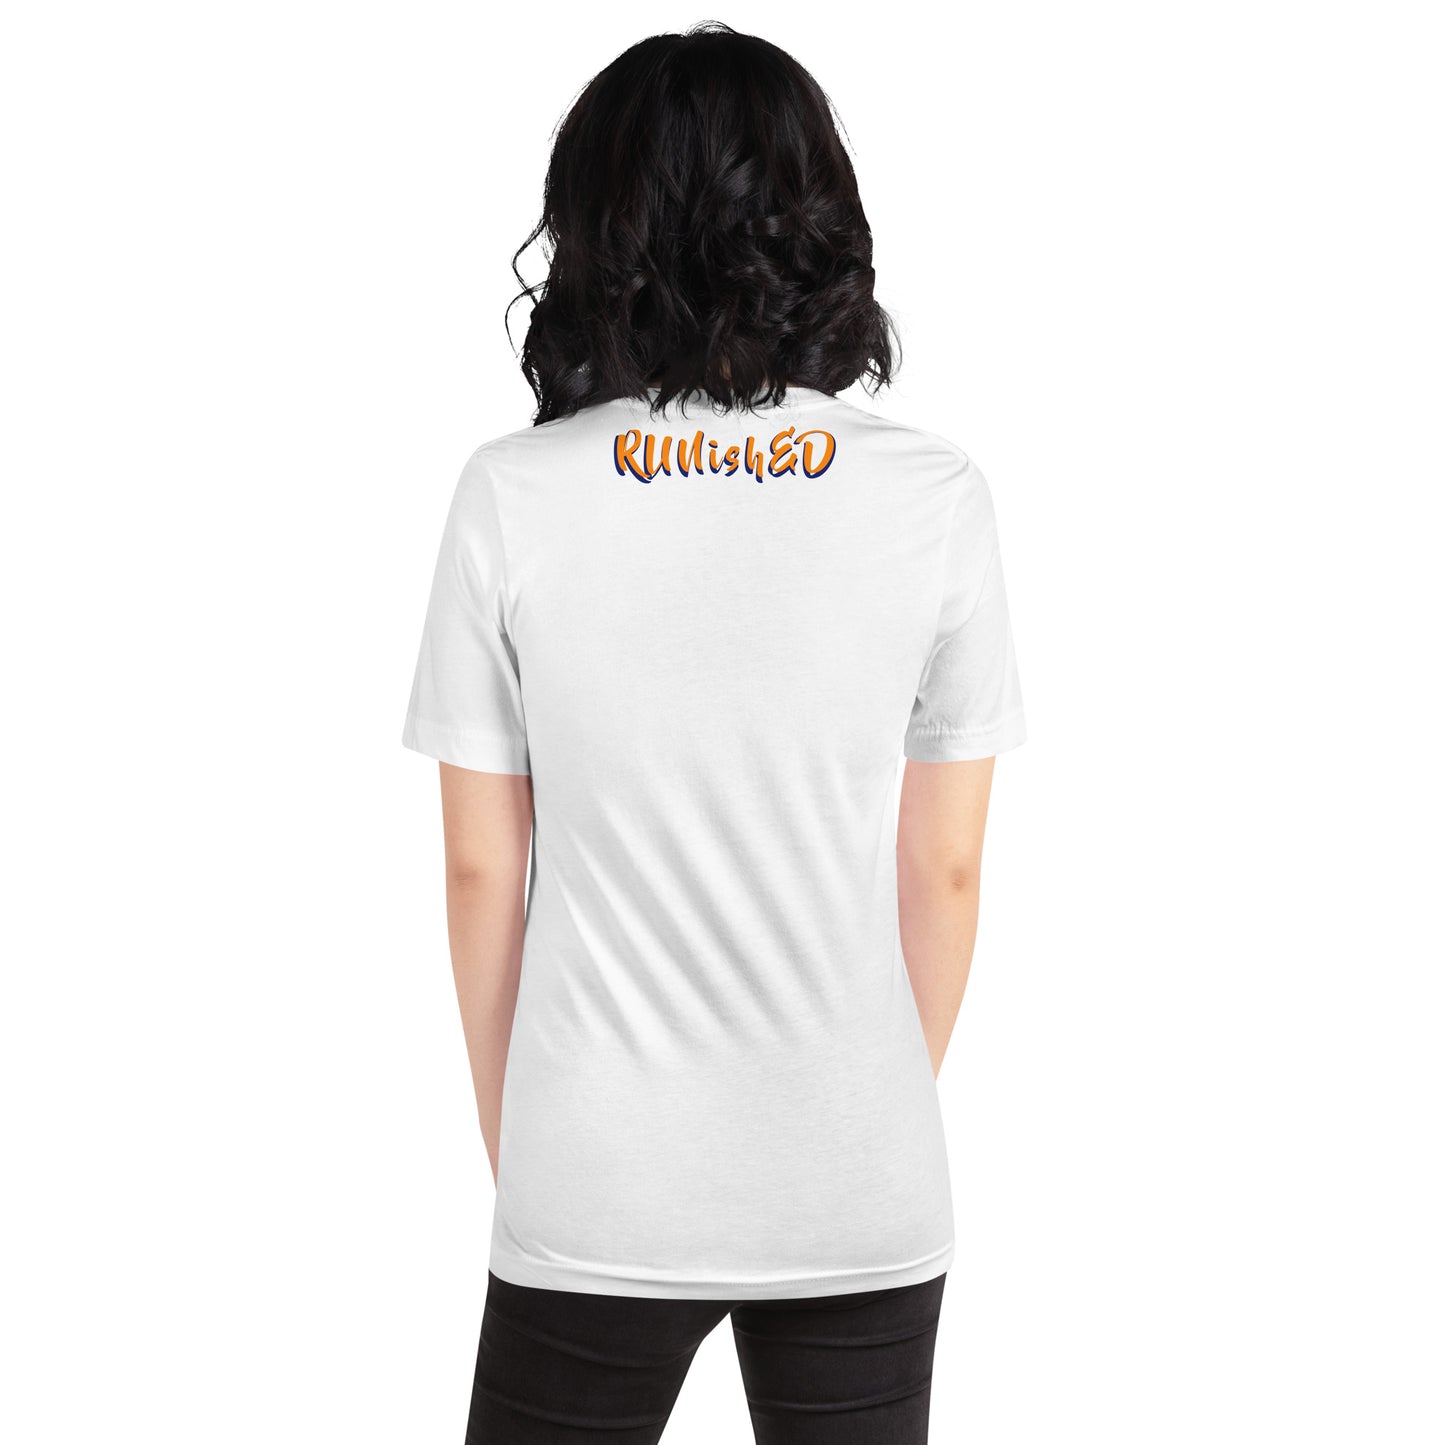 RUNishED AI Art Unisex t-shirt design 3 - Come Run With Us!